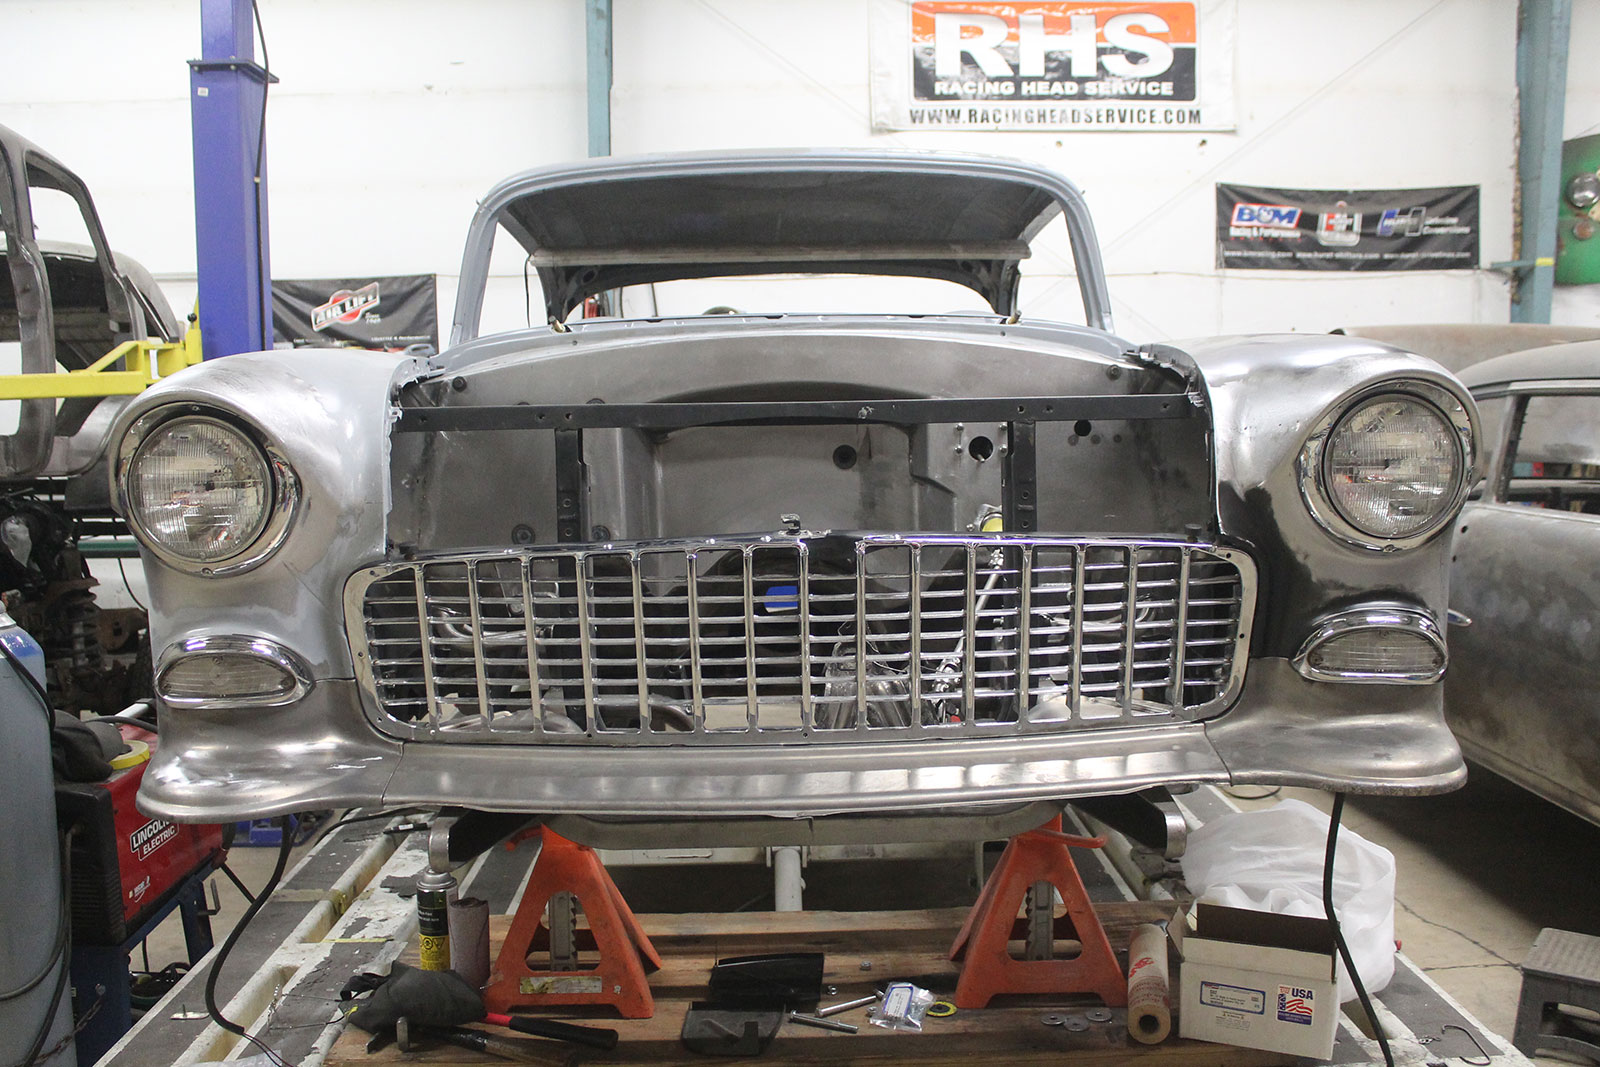 25 Test fitting the front splash aprons parking lights and grille on the vintage car with aligned fenders